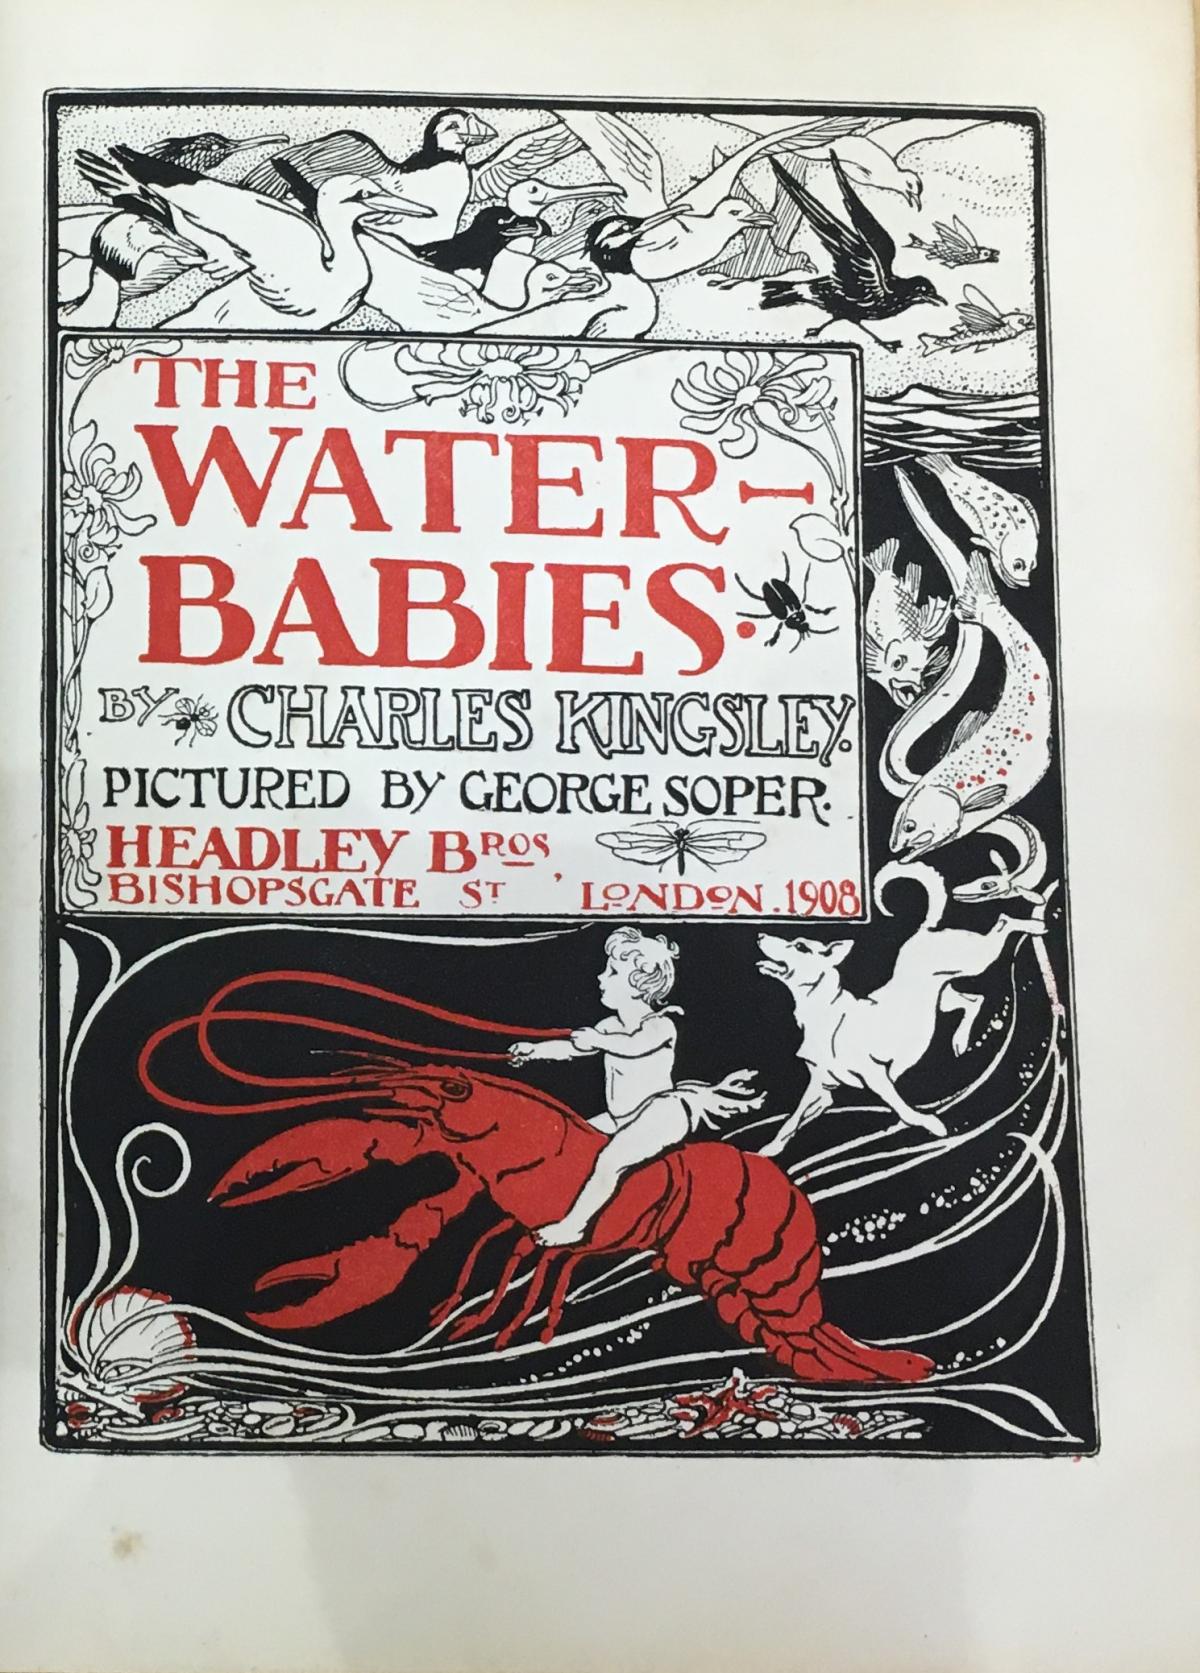 Another famous book Charles Kingsley wrote, called The Water Babies.  It was originally published in 1863.  This is the inside cover image.  (Devon Heritage Centre: West Country Studies Library)